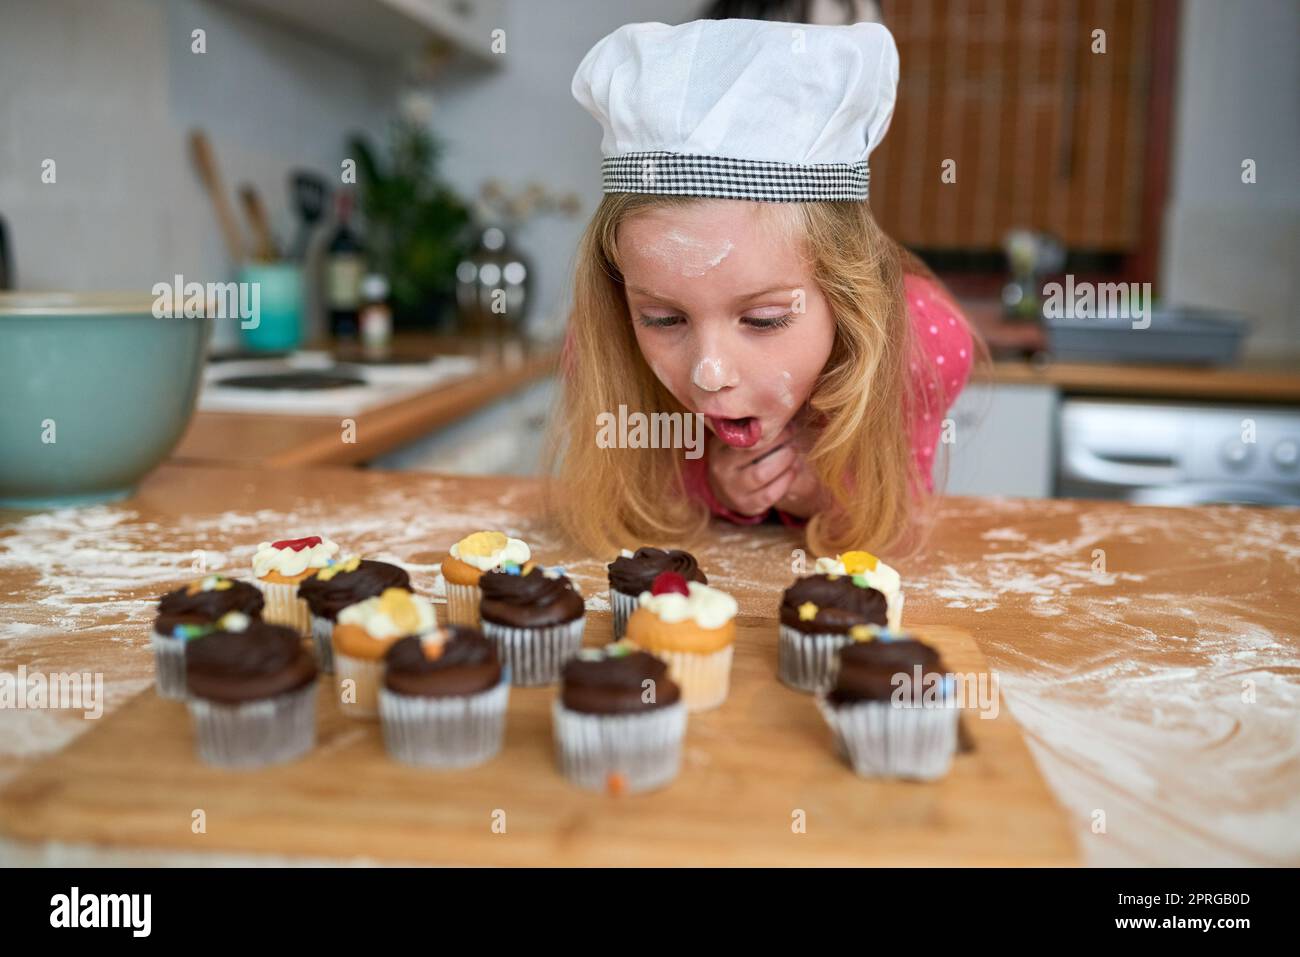 They look so delicious. a surprised little girl looking at cupcakes she baked at home. Stock Photo